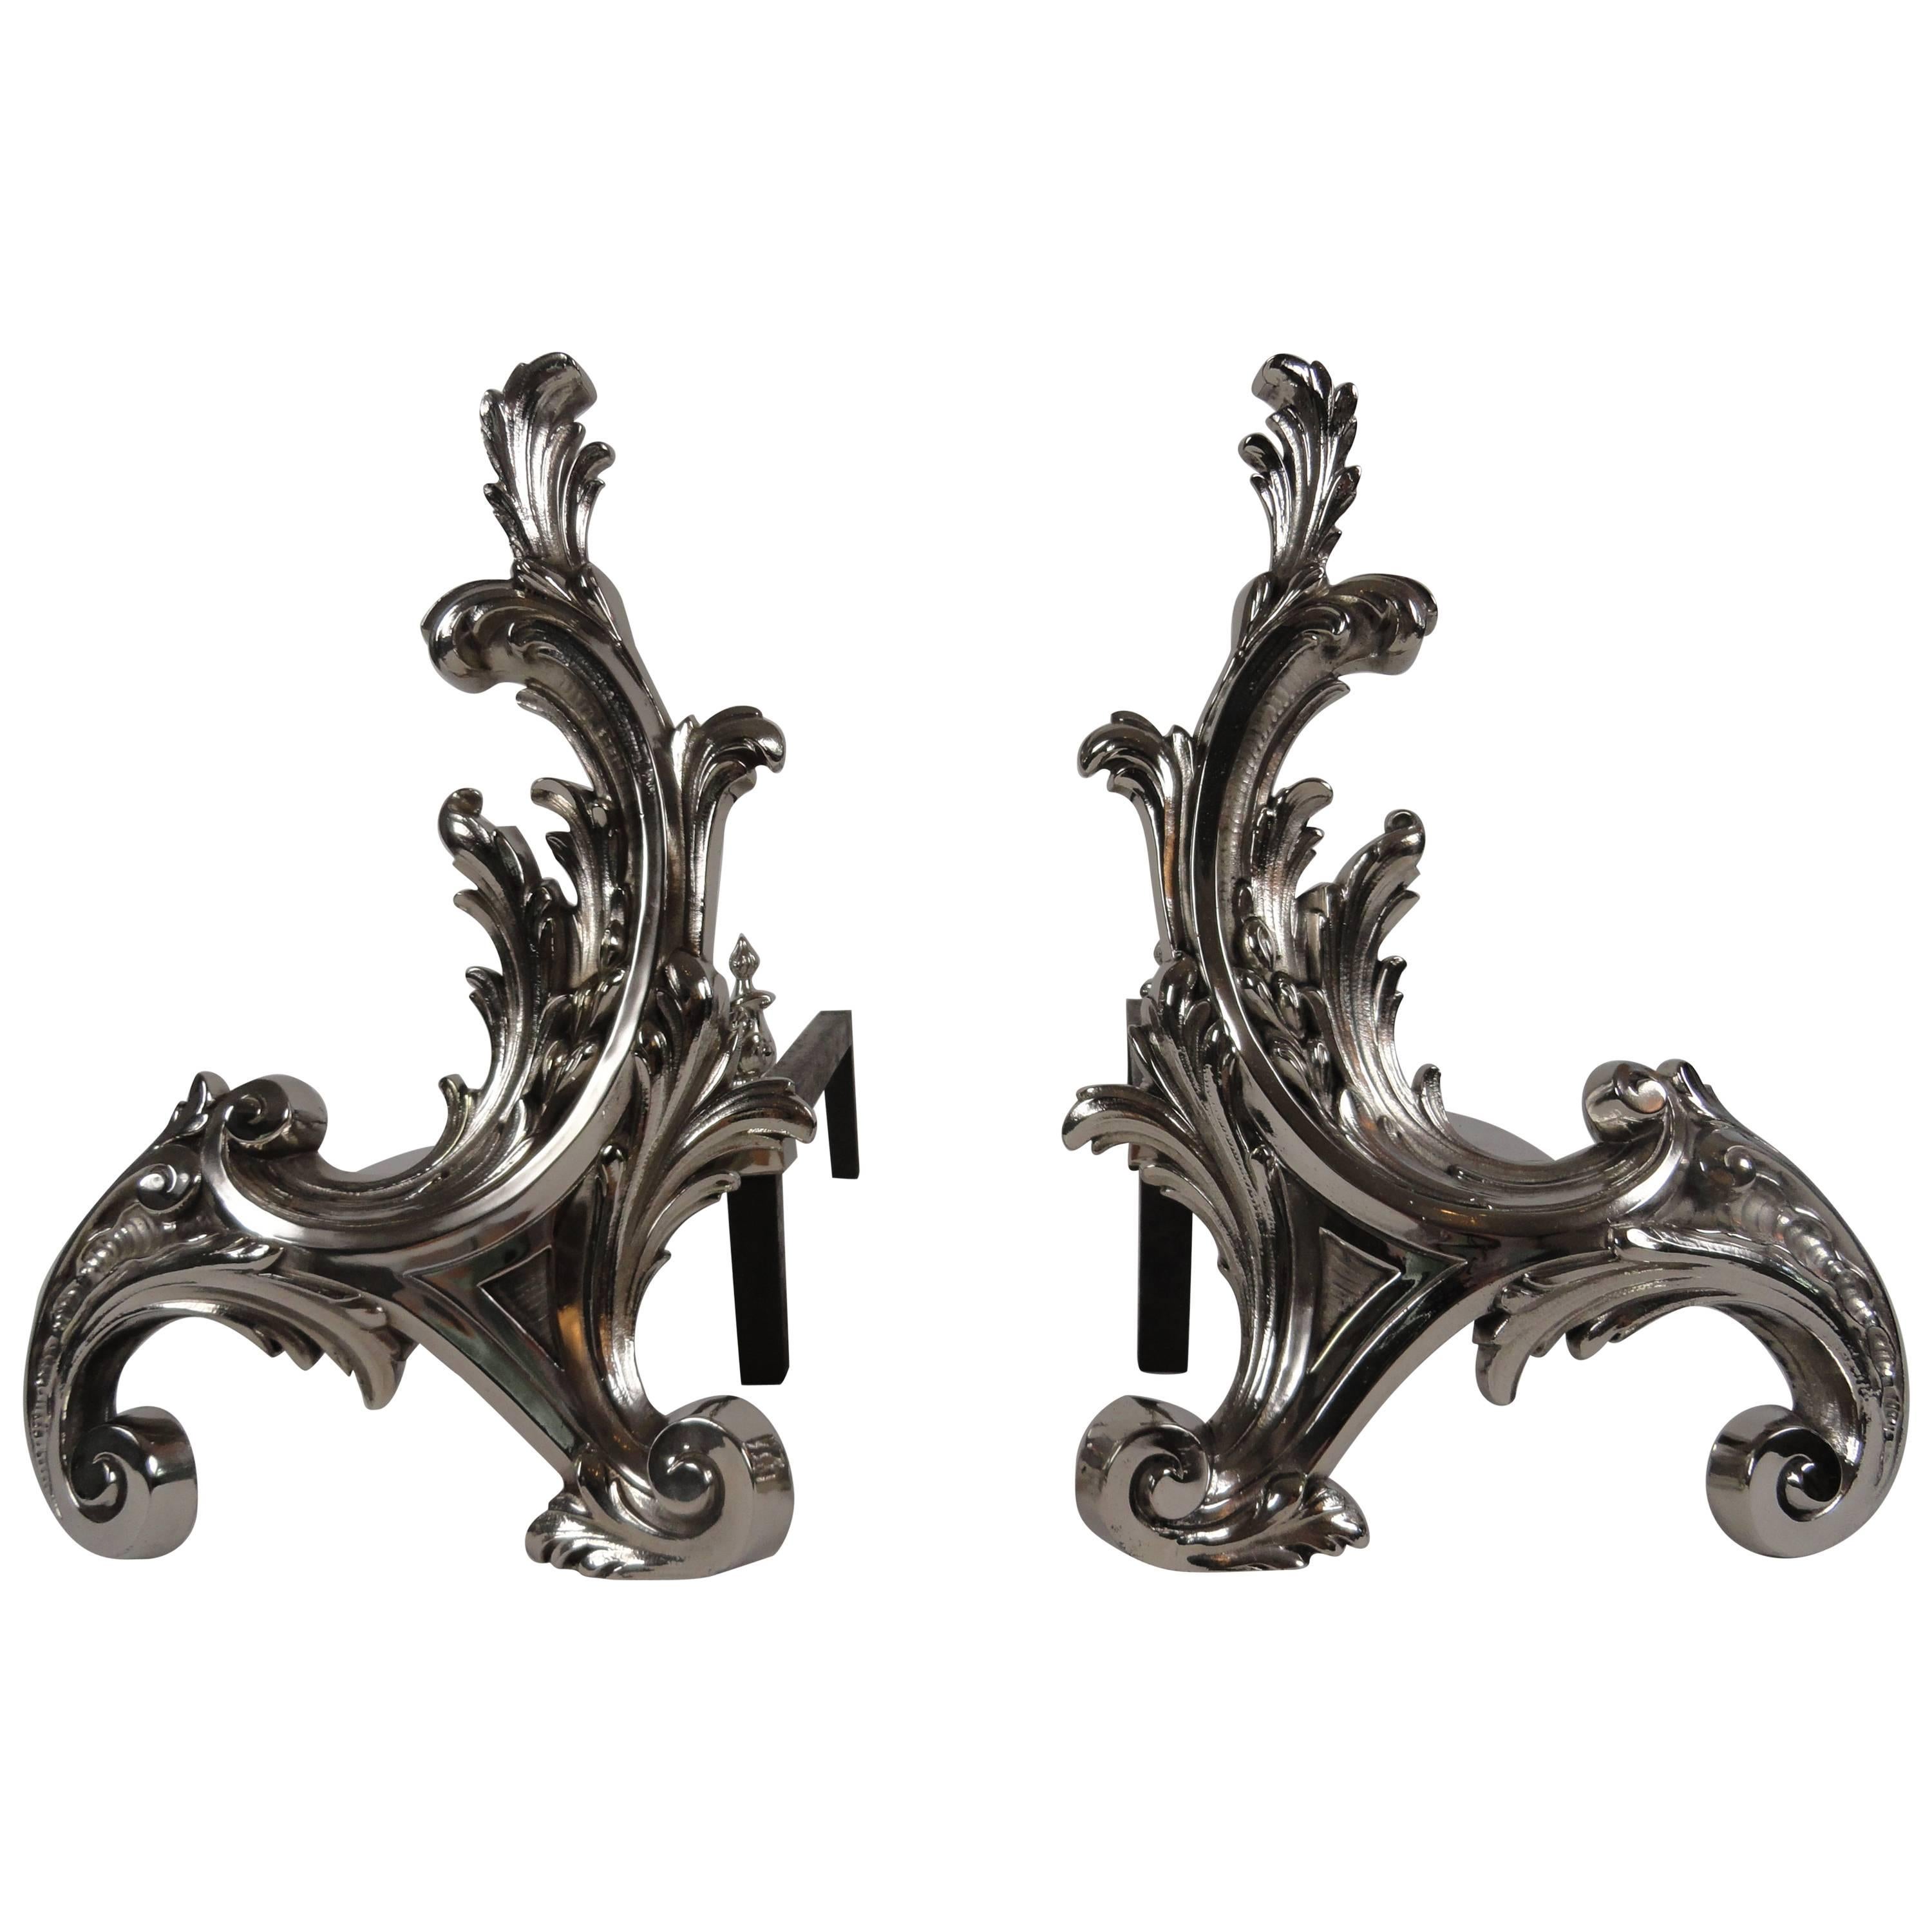 19th Century French Pair of Rococo-Style Chenets For Sale